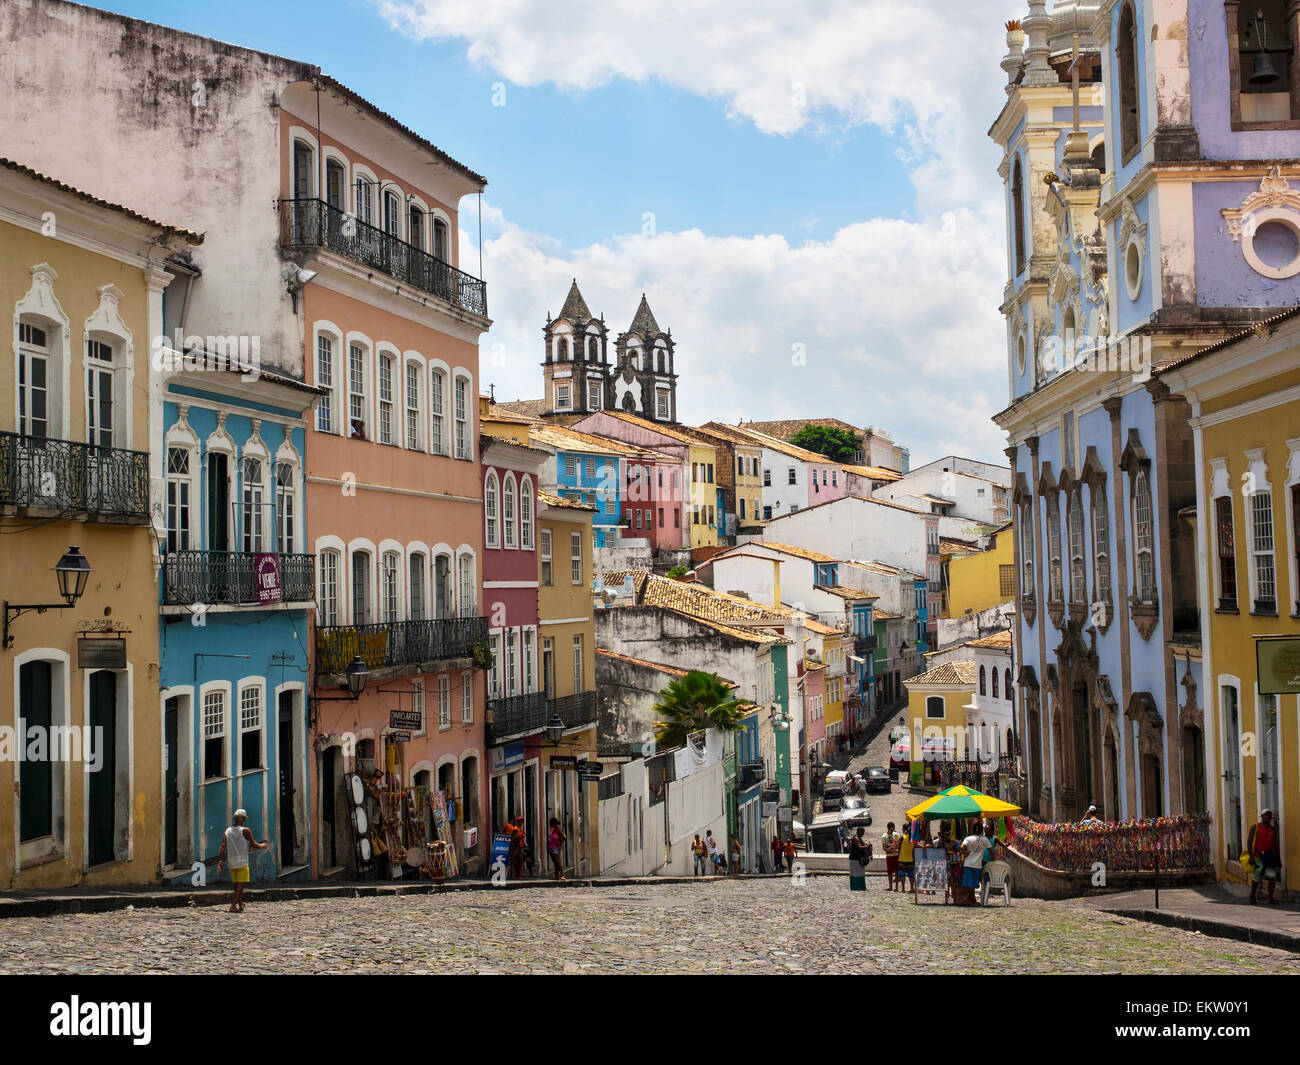 View of colorful colonial buildings in the historic district of Pelourinho in Salvador, Bahia, Brazil. Stock Photo